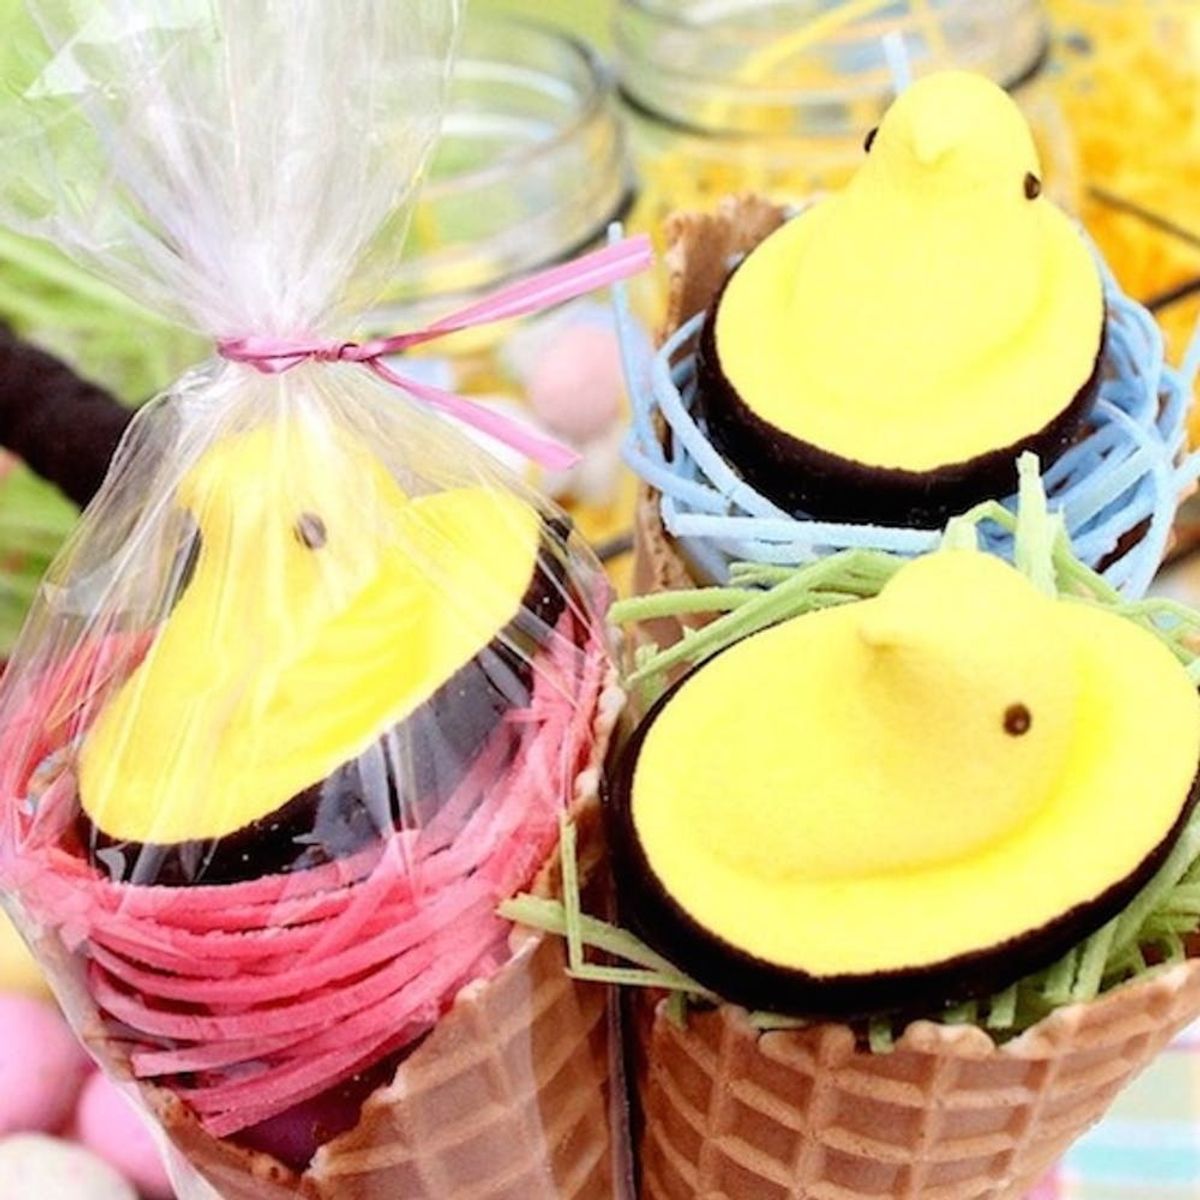 11 DIY Projects to Make With Peeps for Easter